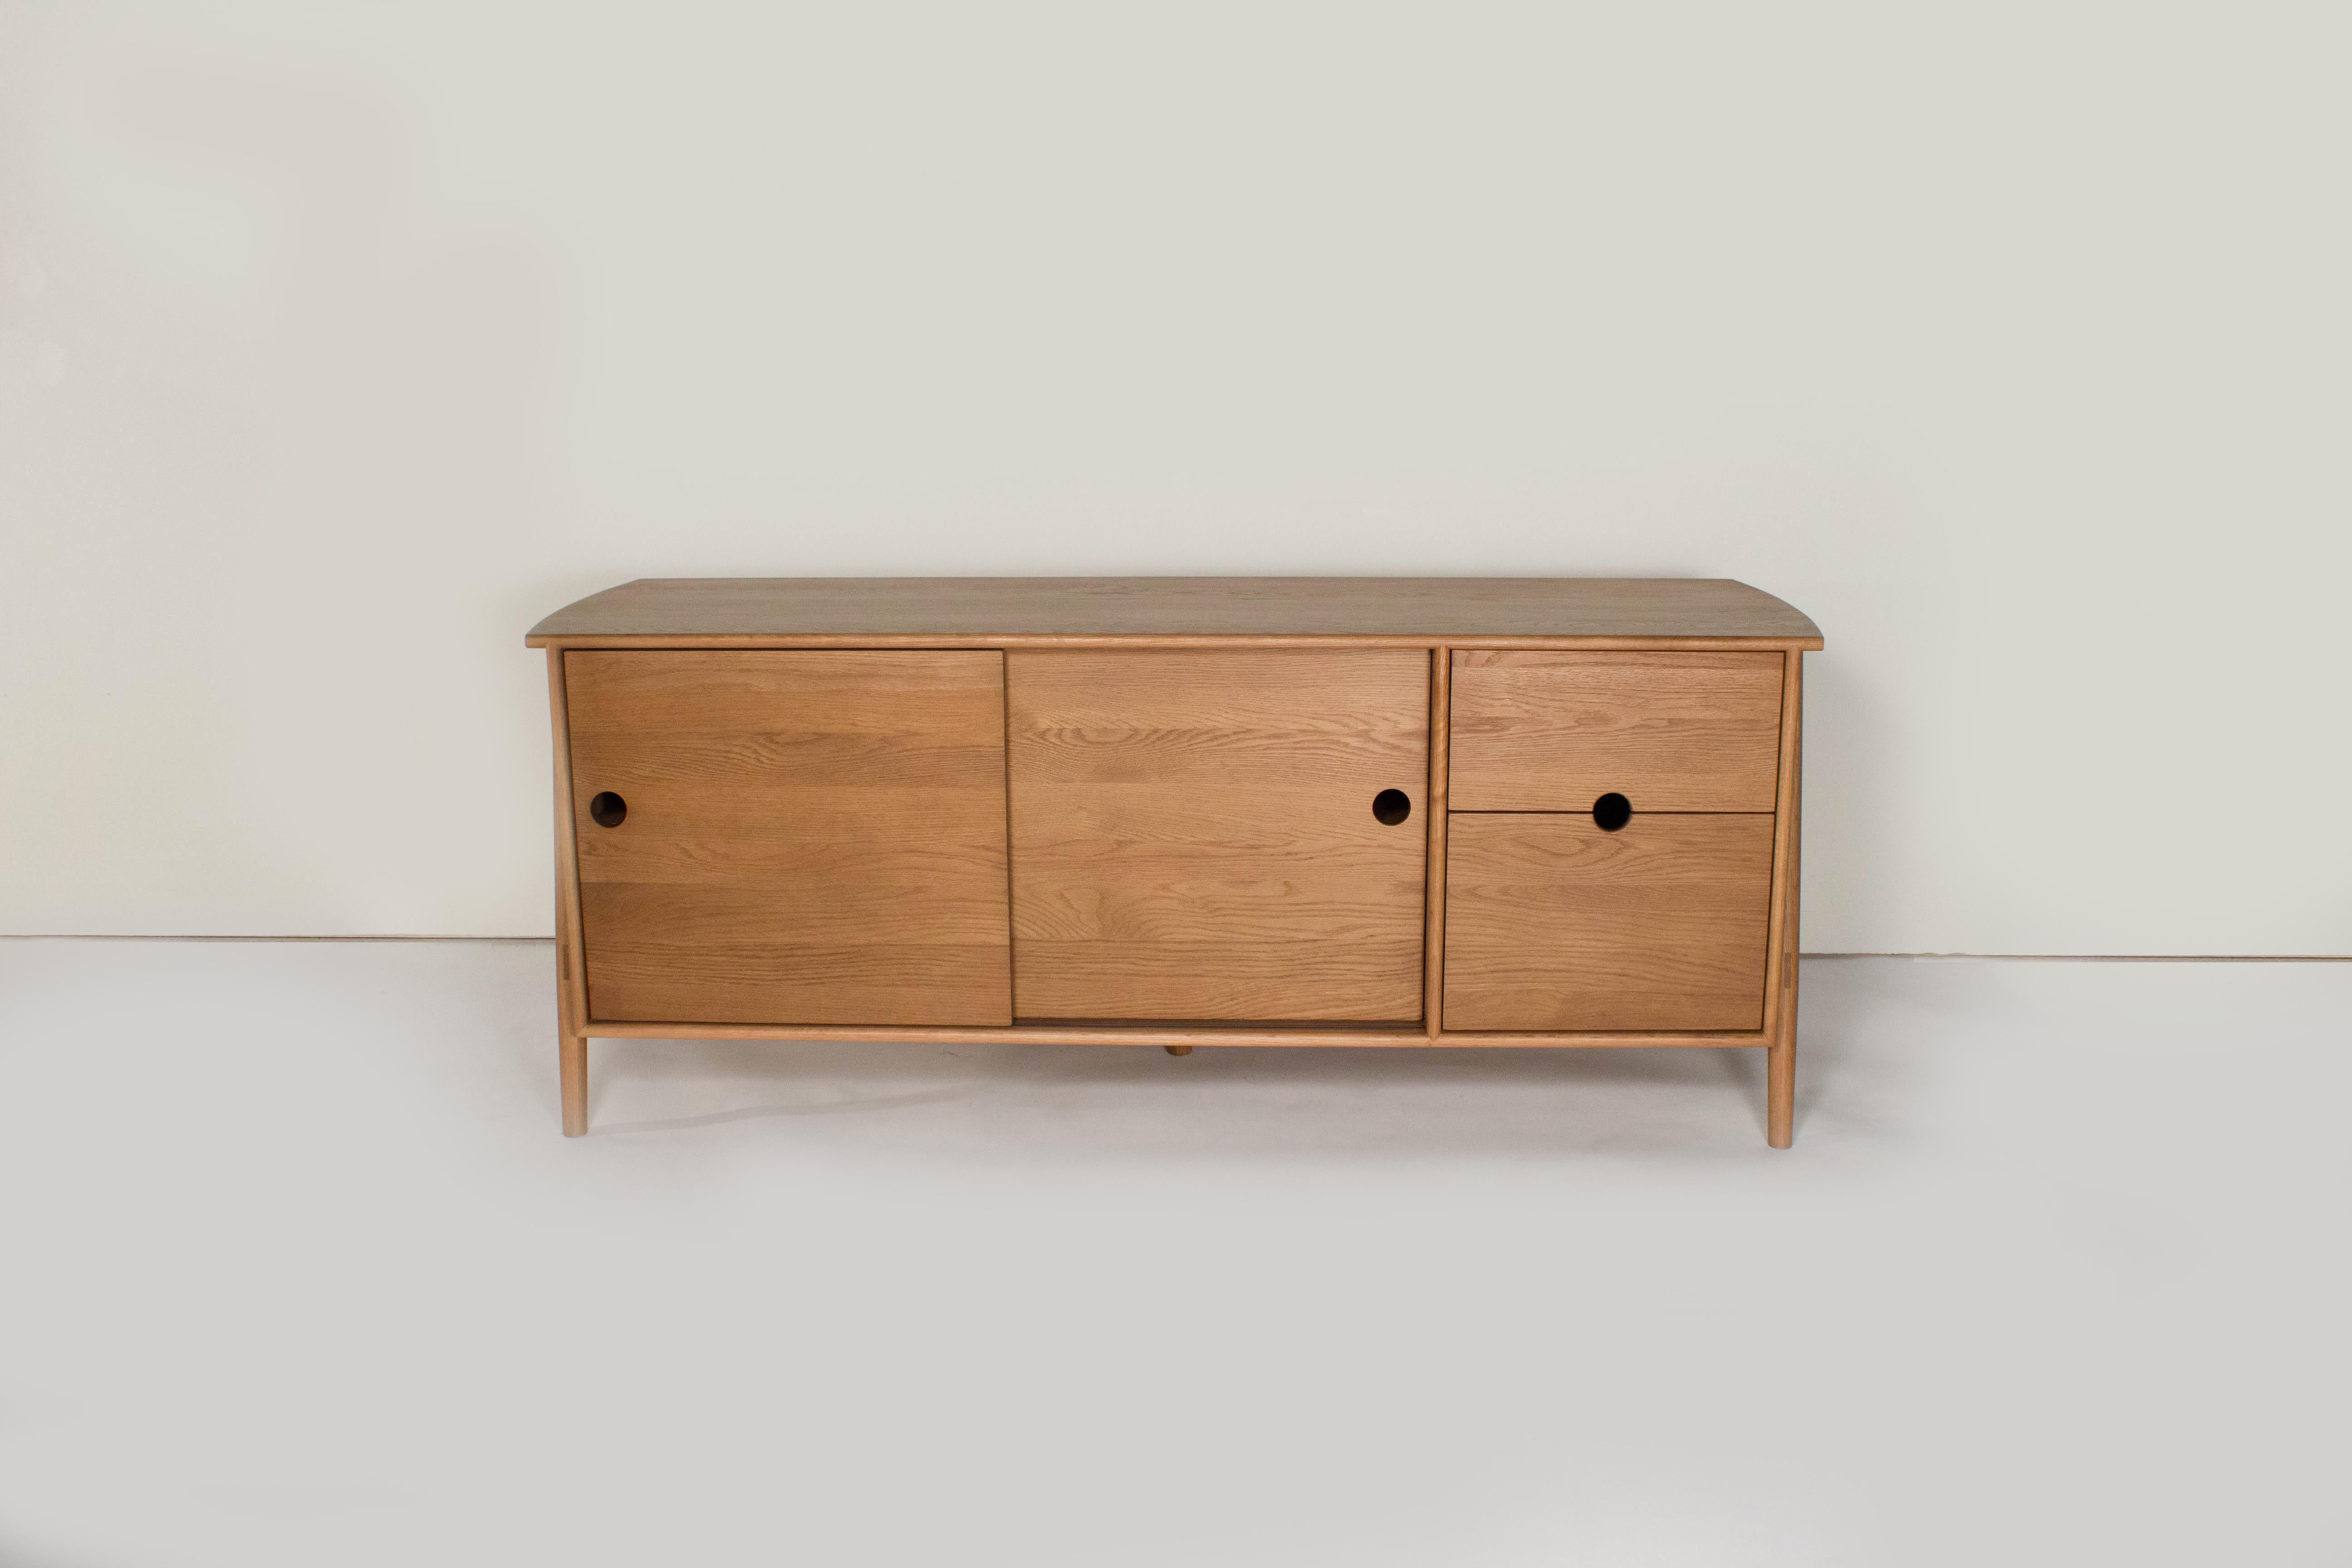 Sun at six is a Brooklyn design studio. We work with traditional Chinese joinery masters to handcraft our pieces using traditional joinery. The woodbine sideboard features dovetails and traditional joinery throughout.

• Solid white oak
• Tung